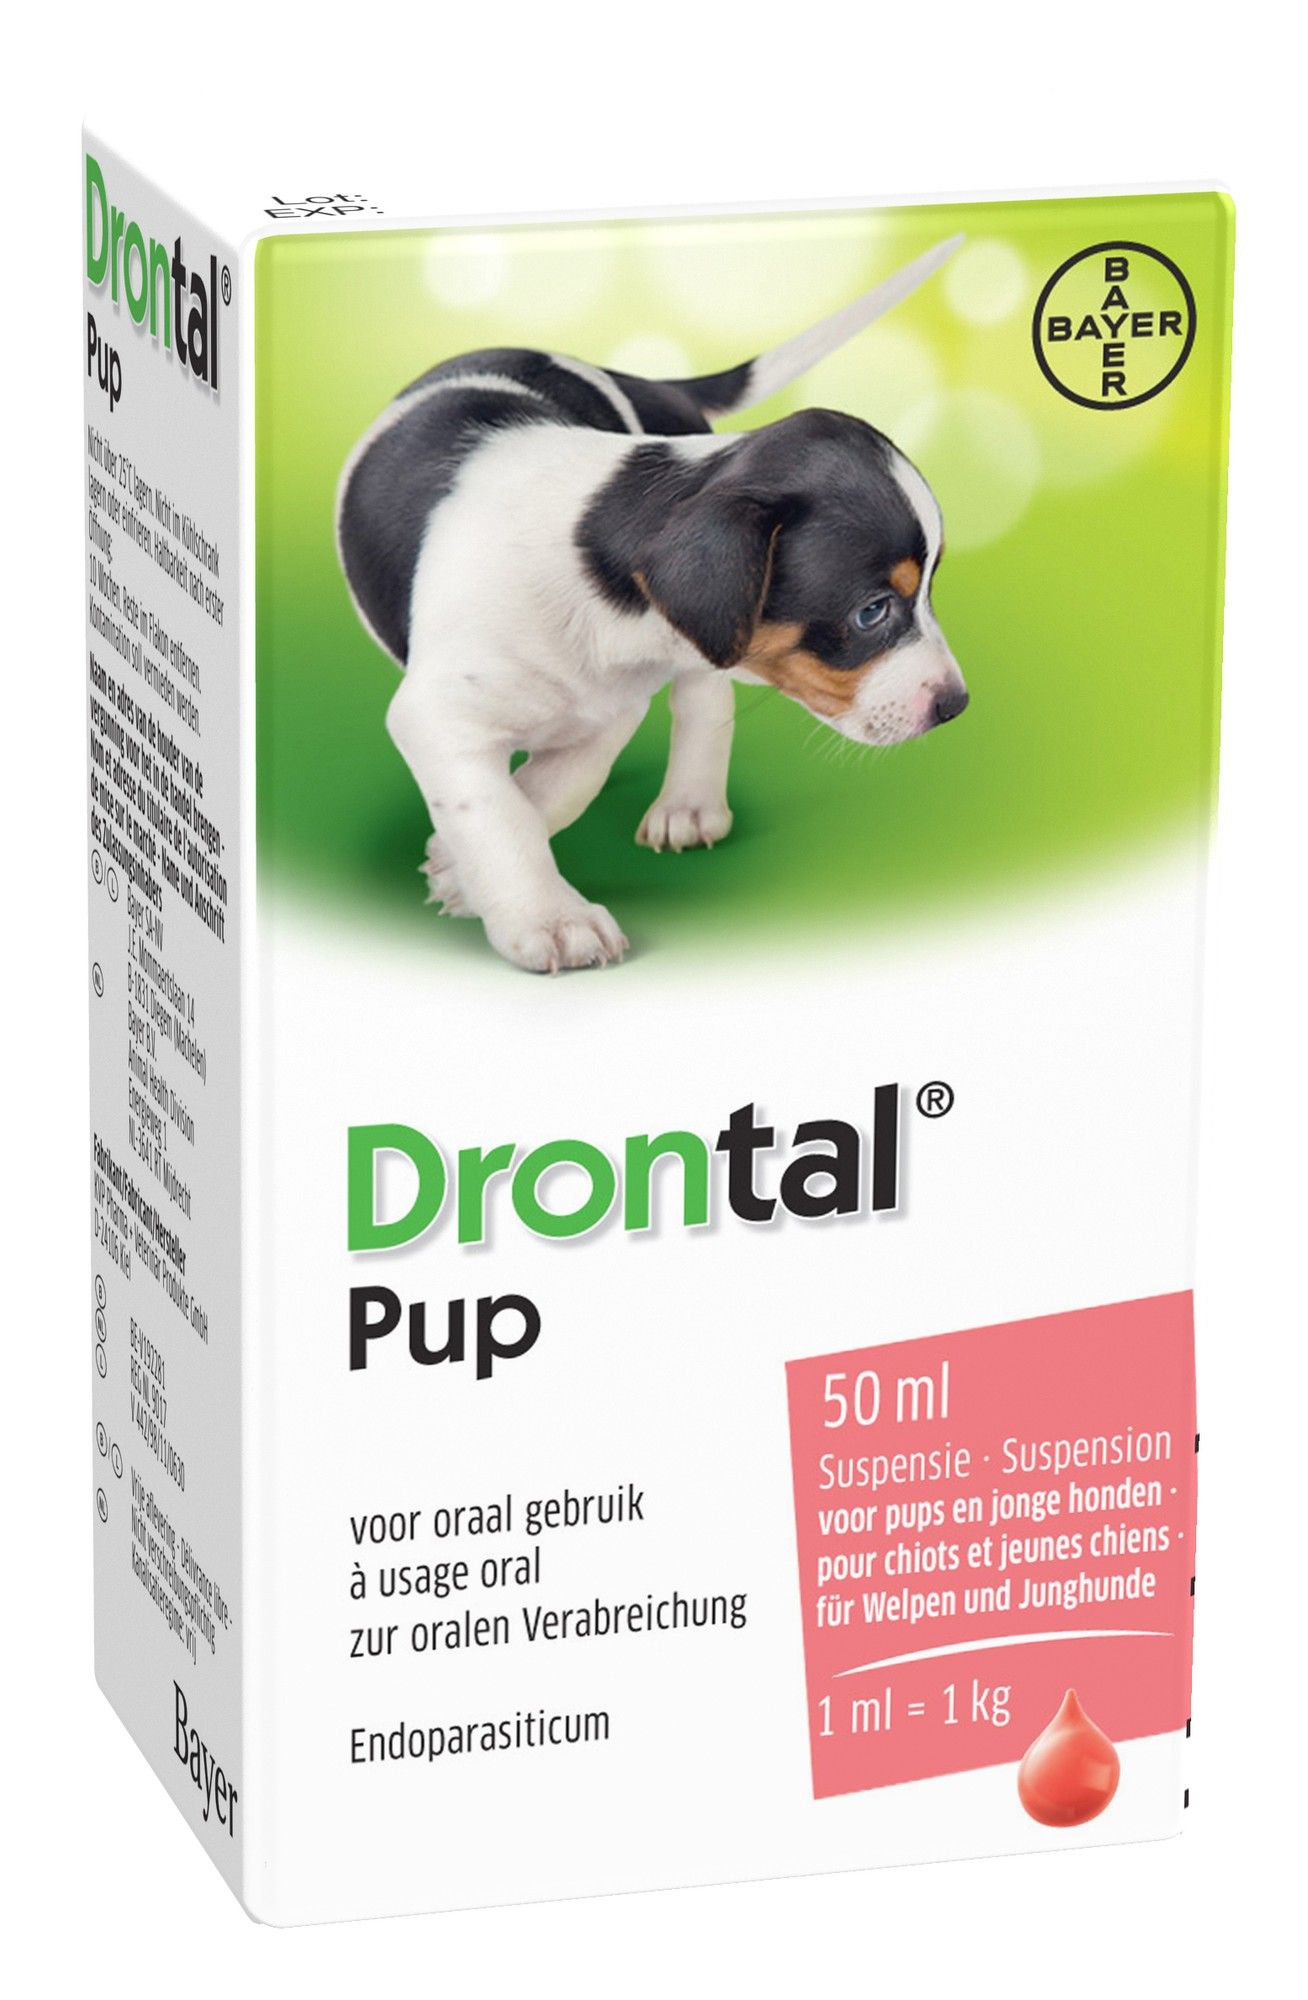 Drontal Pup Ontwormingsmiddel - Puppy